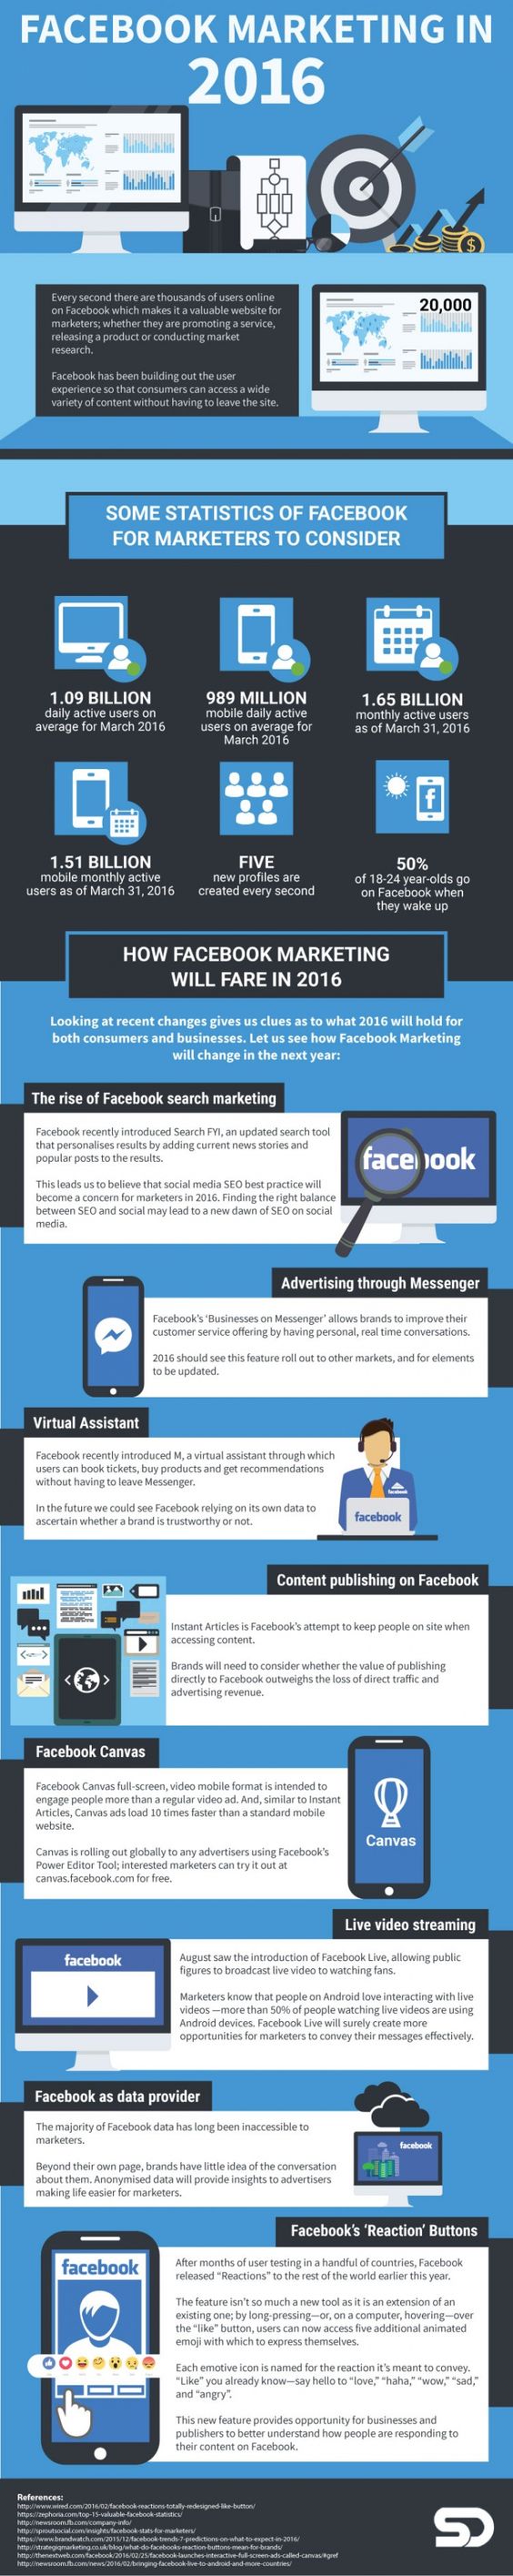 Infographic Of The Week: What's New In 2016 For Facebook Marketing